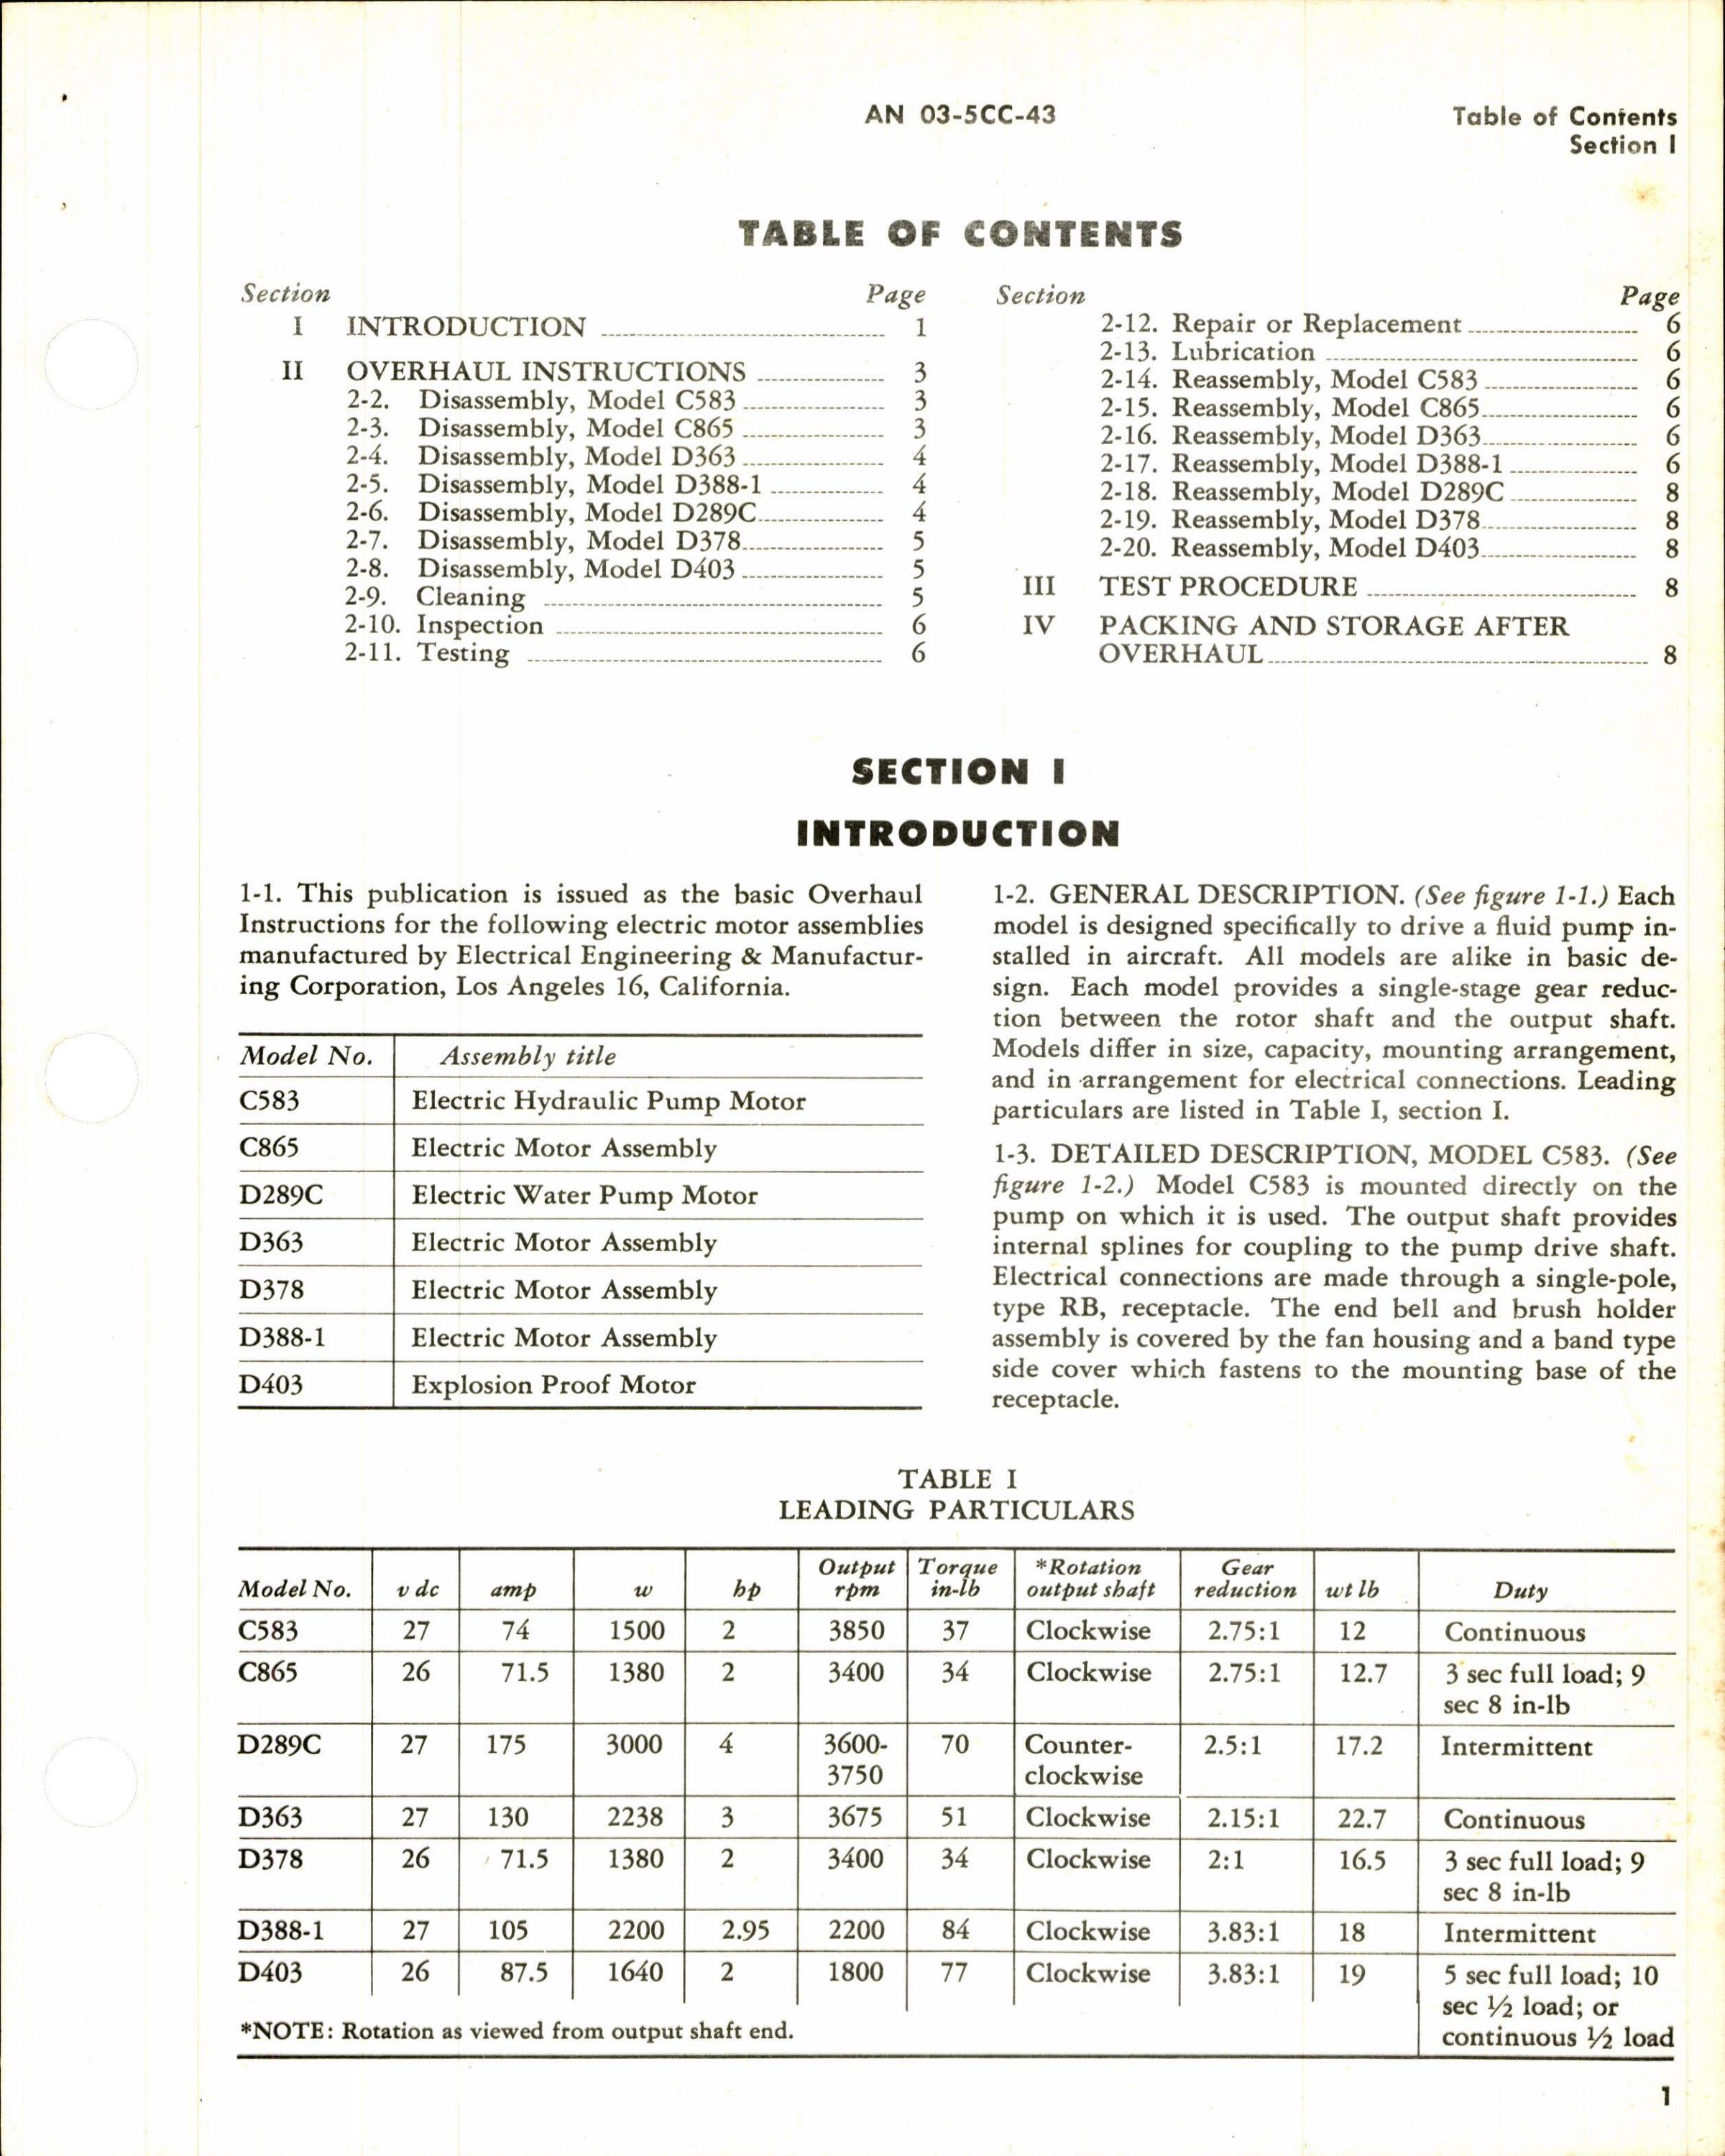 Sample page 5 from AirCorps Library document: Overhaul Instructions for Electrical Engineering Co Electric Motors